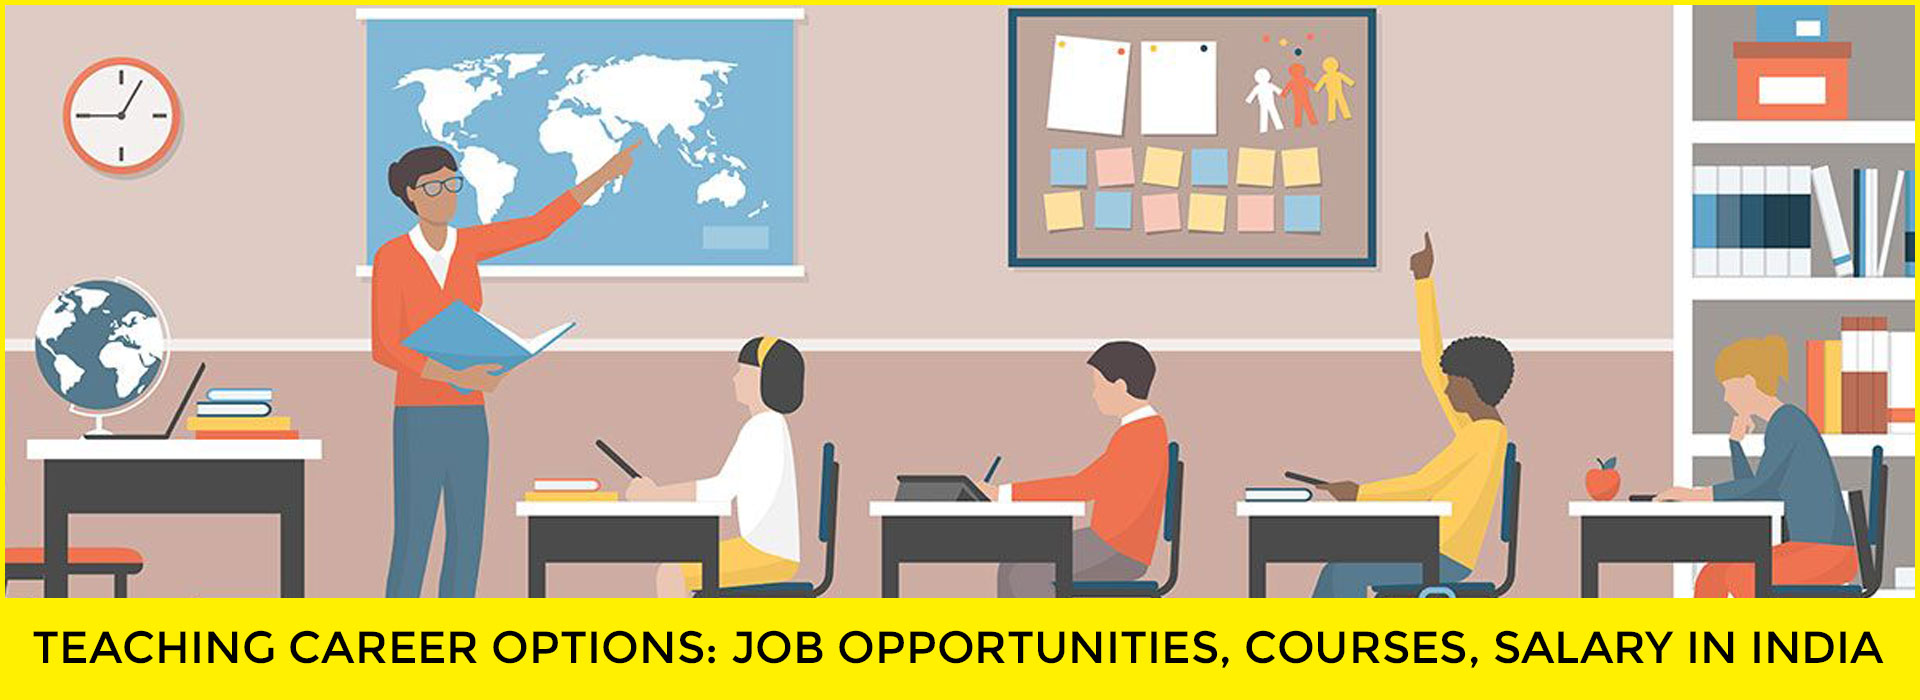 Teaching Career Options: Job Opportunities, Courses, Salary in India 